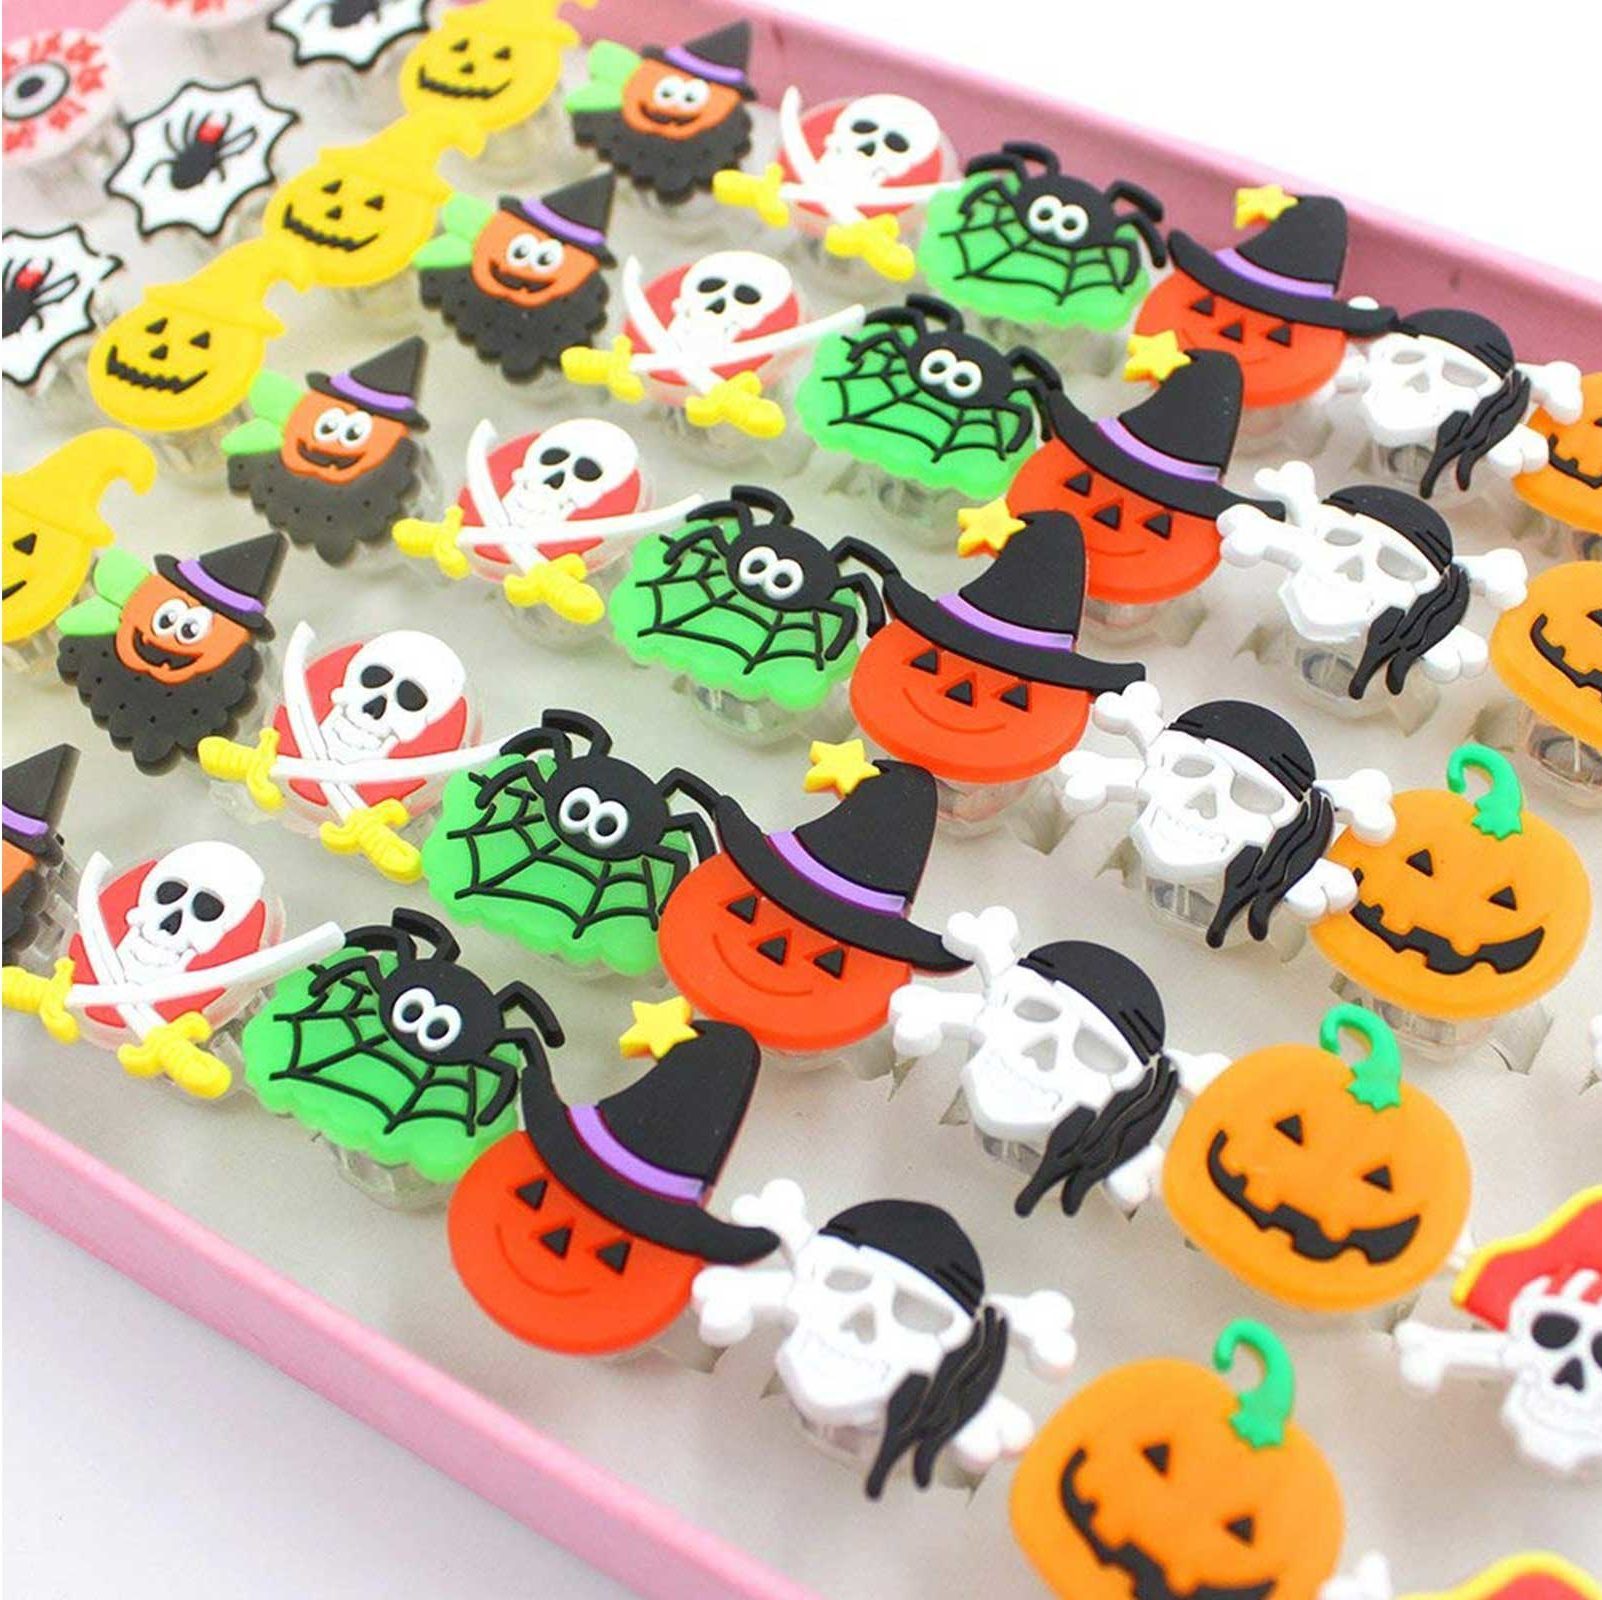 Non-Candy Halloween Treats Kids Actually Love | Reader's Digest